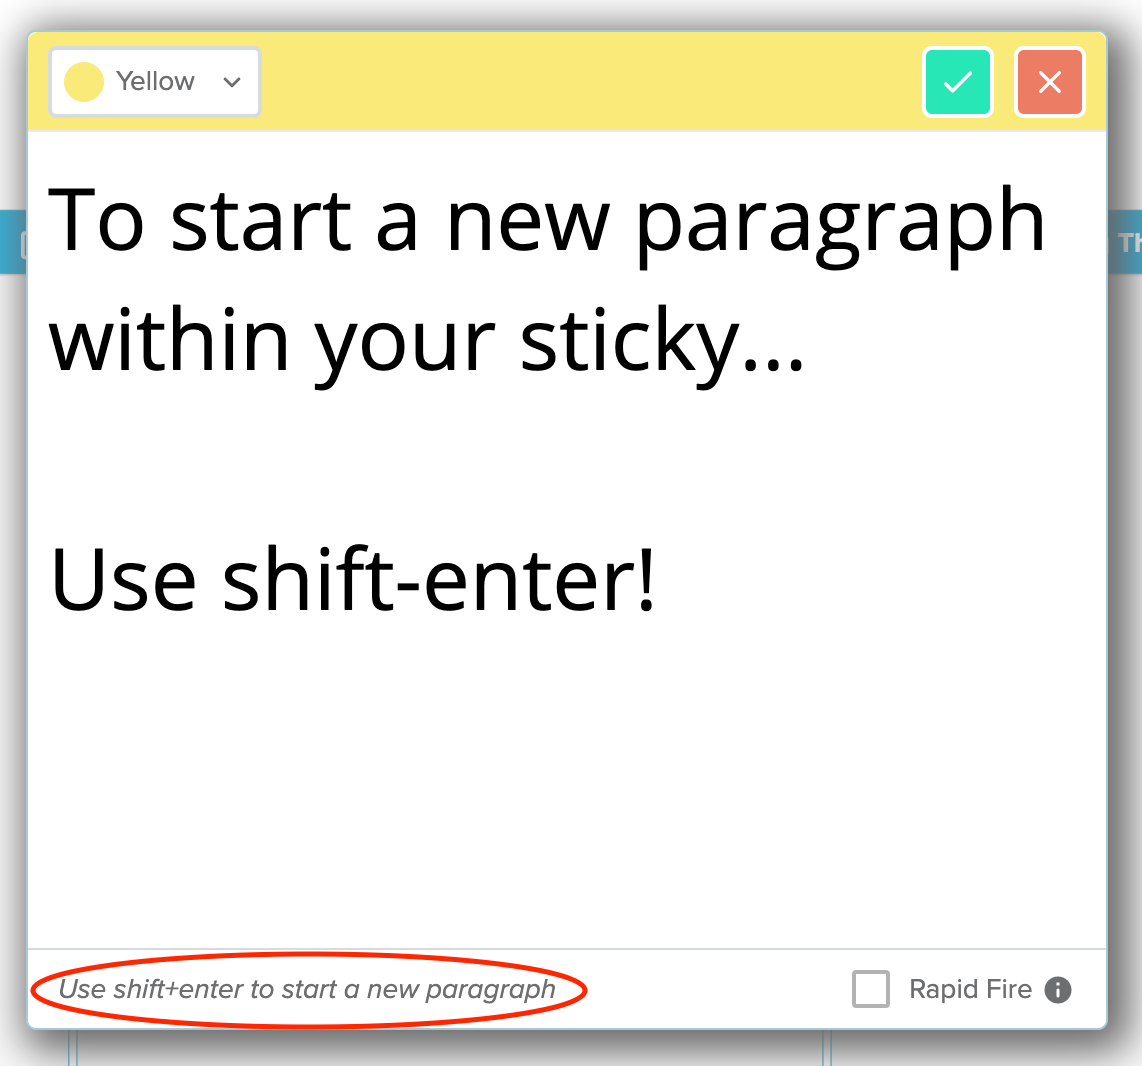 Starting a new paragraph within a sticky